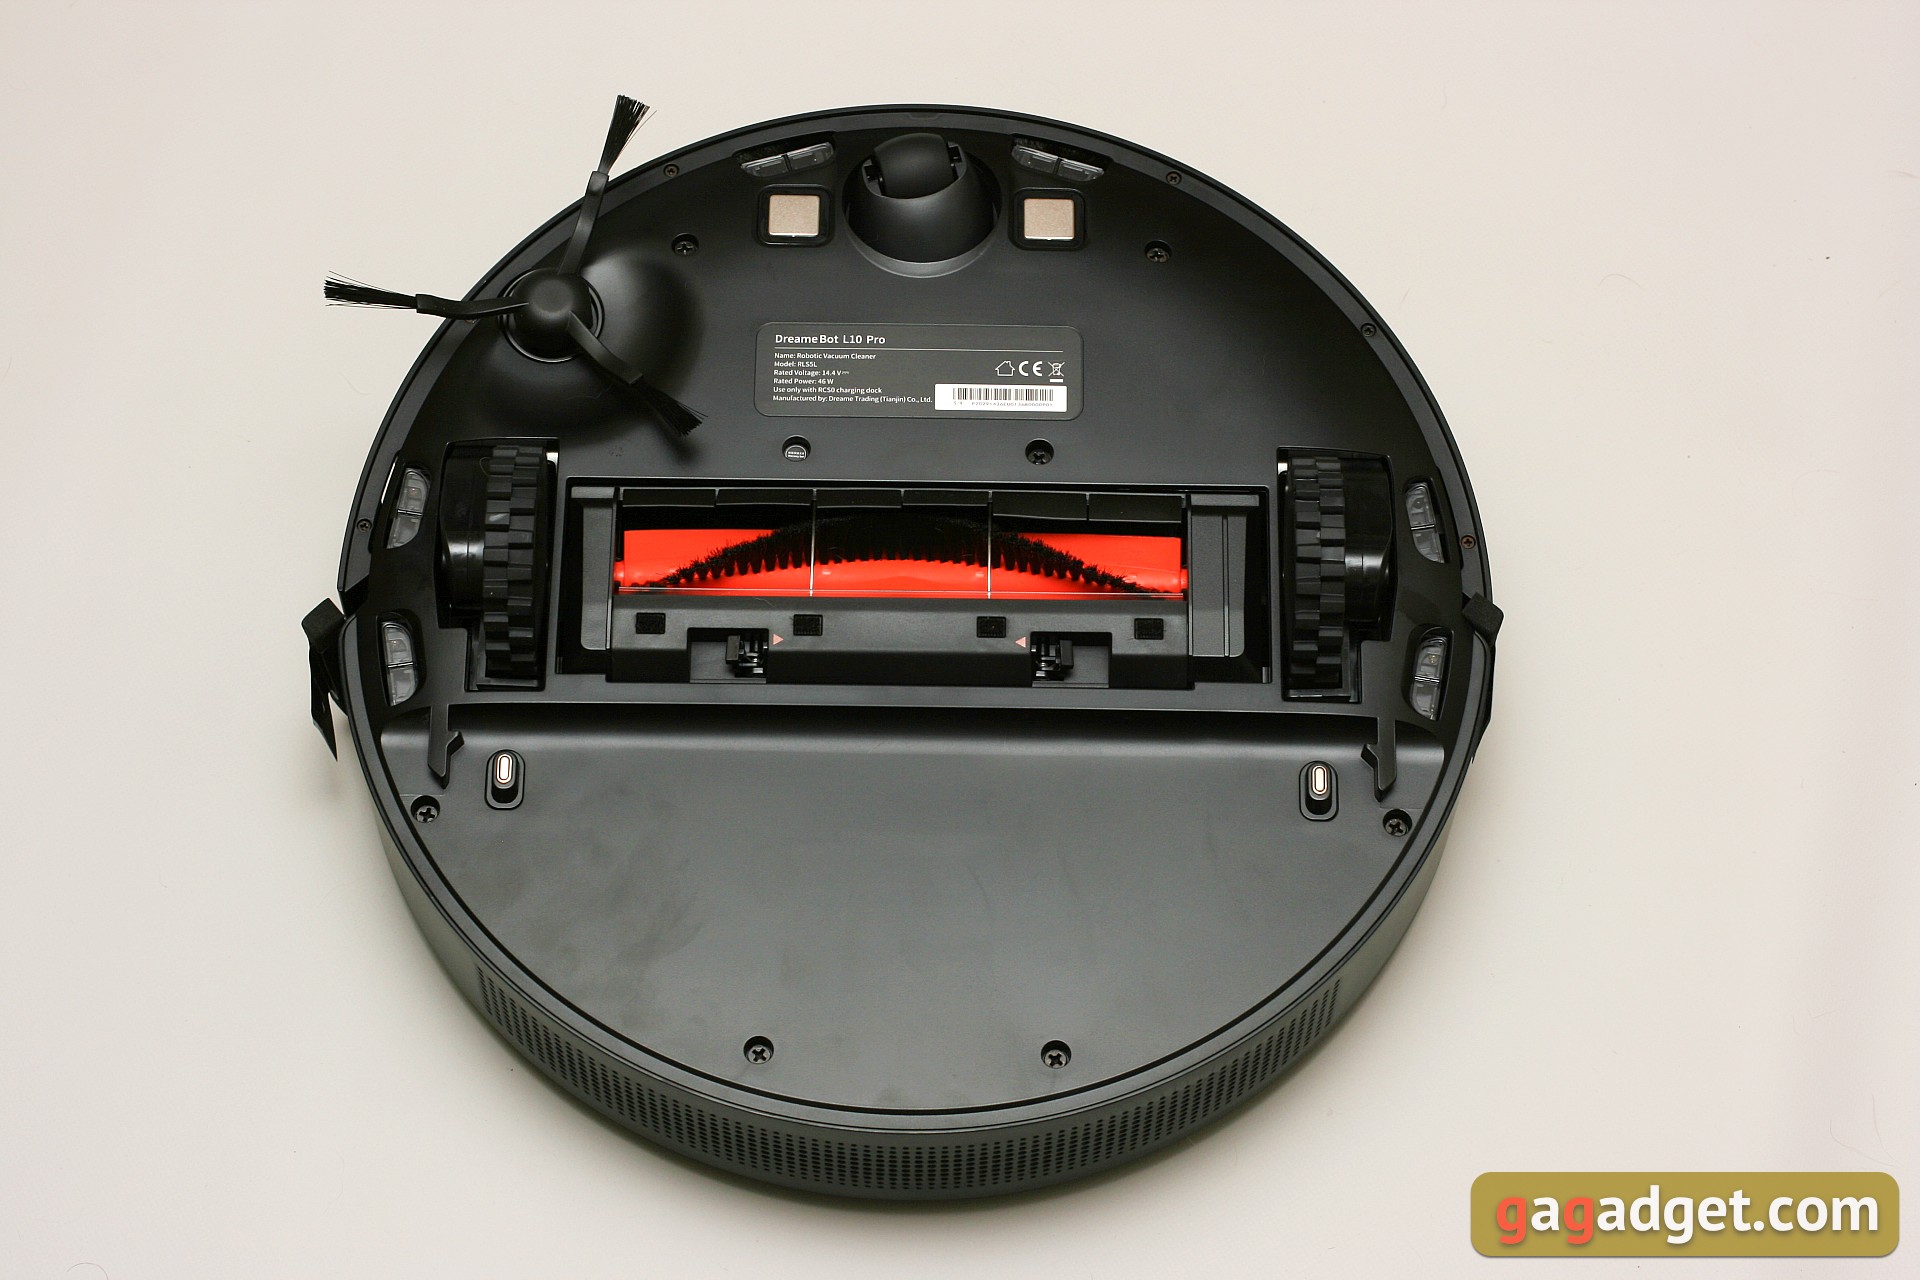 Dreame Bot L10 Pro Review: a Versatile Robot Vacuum Cleaner for Smart Home